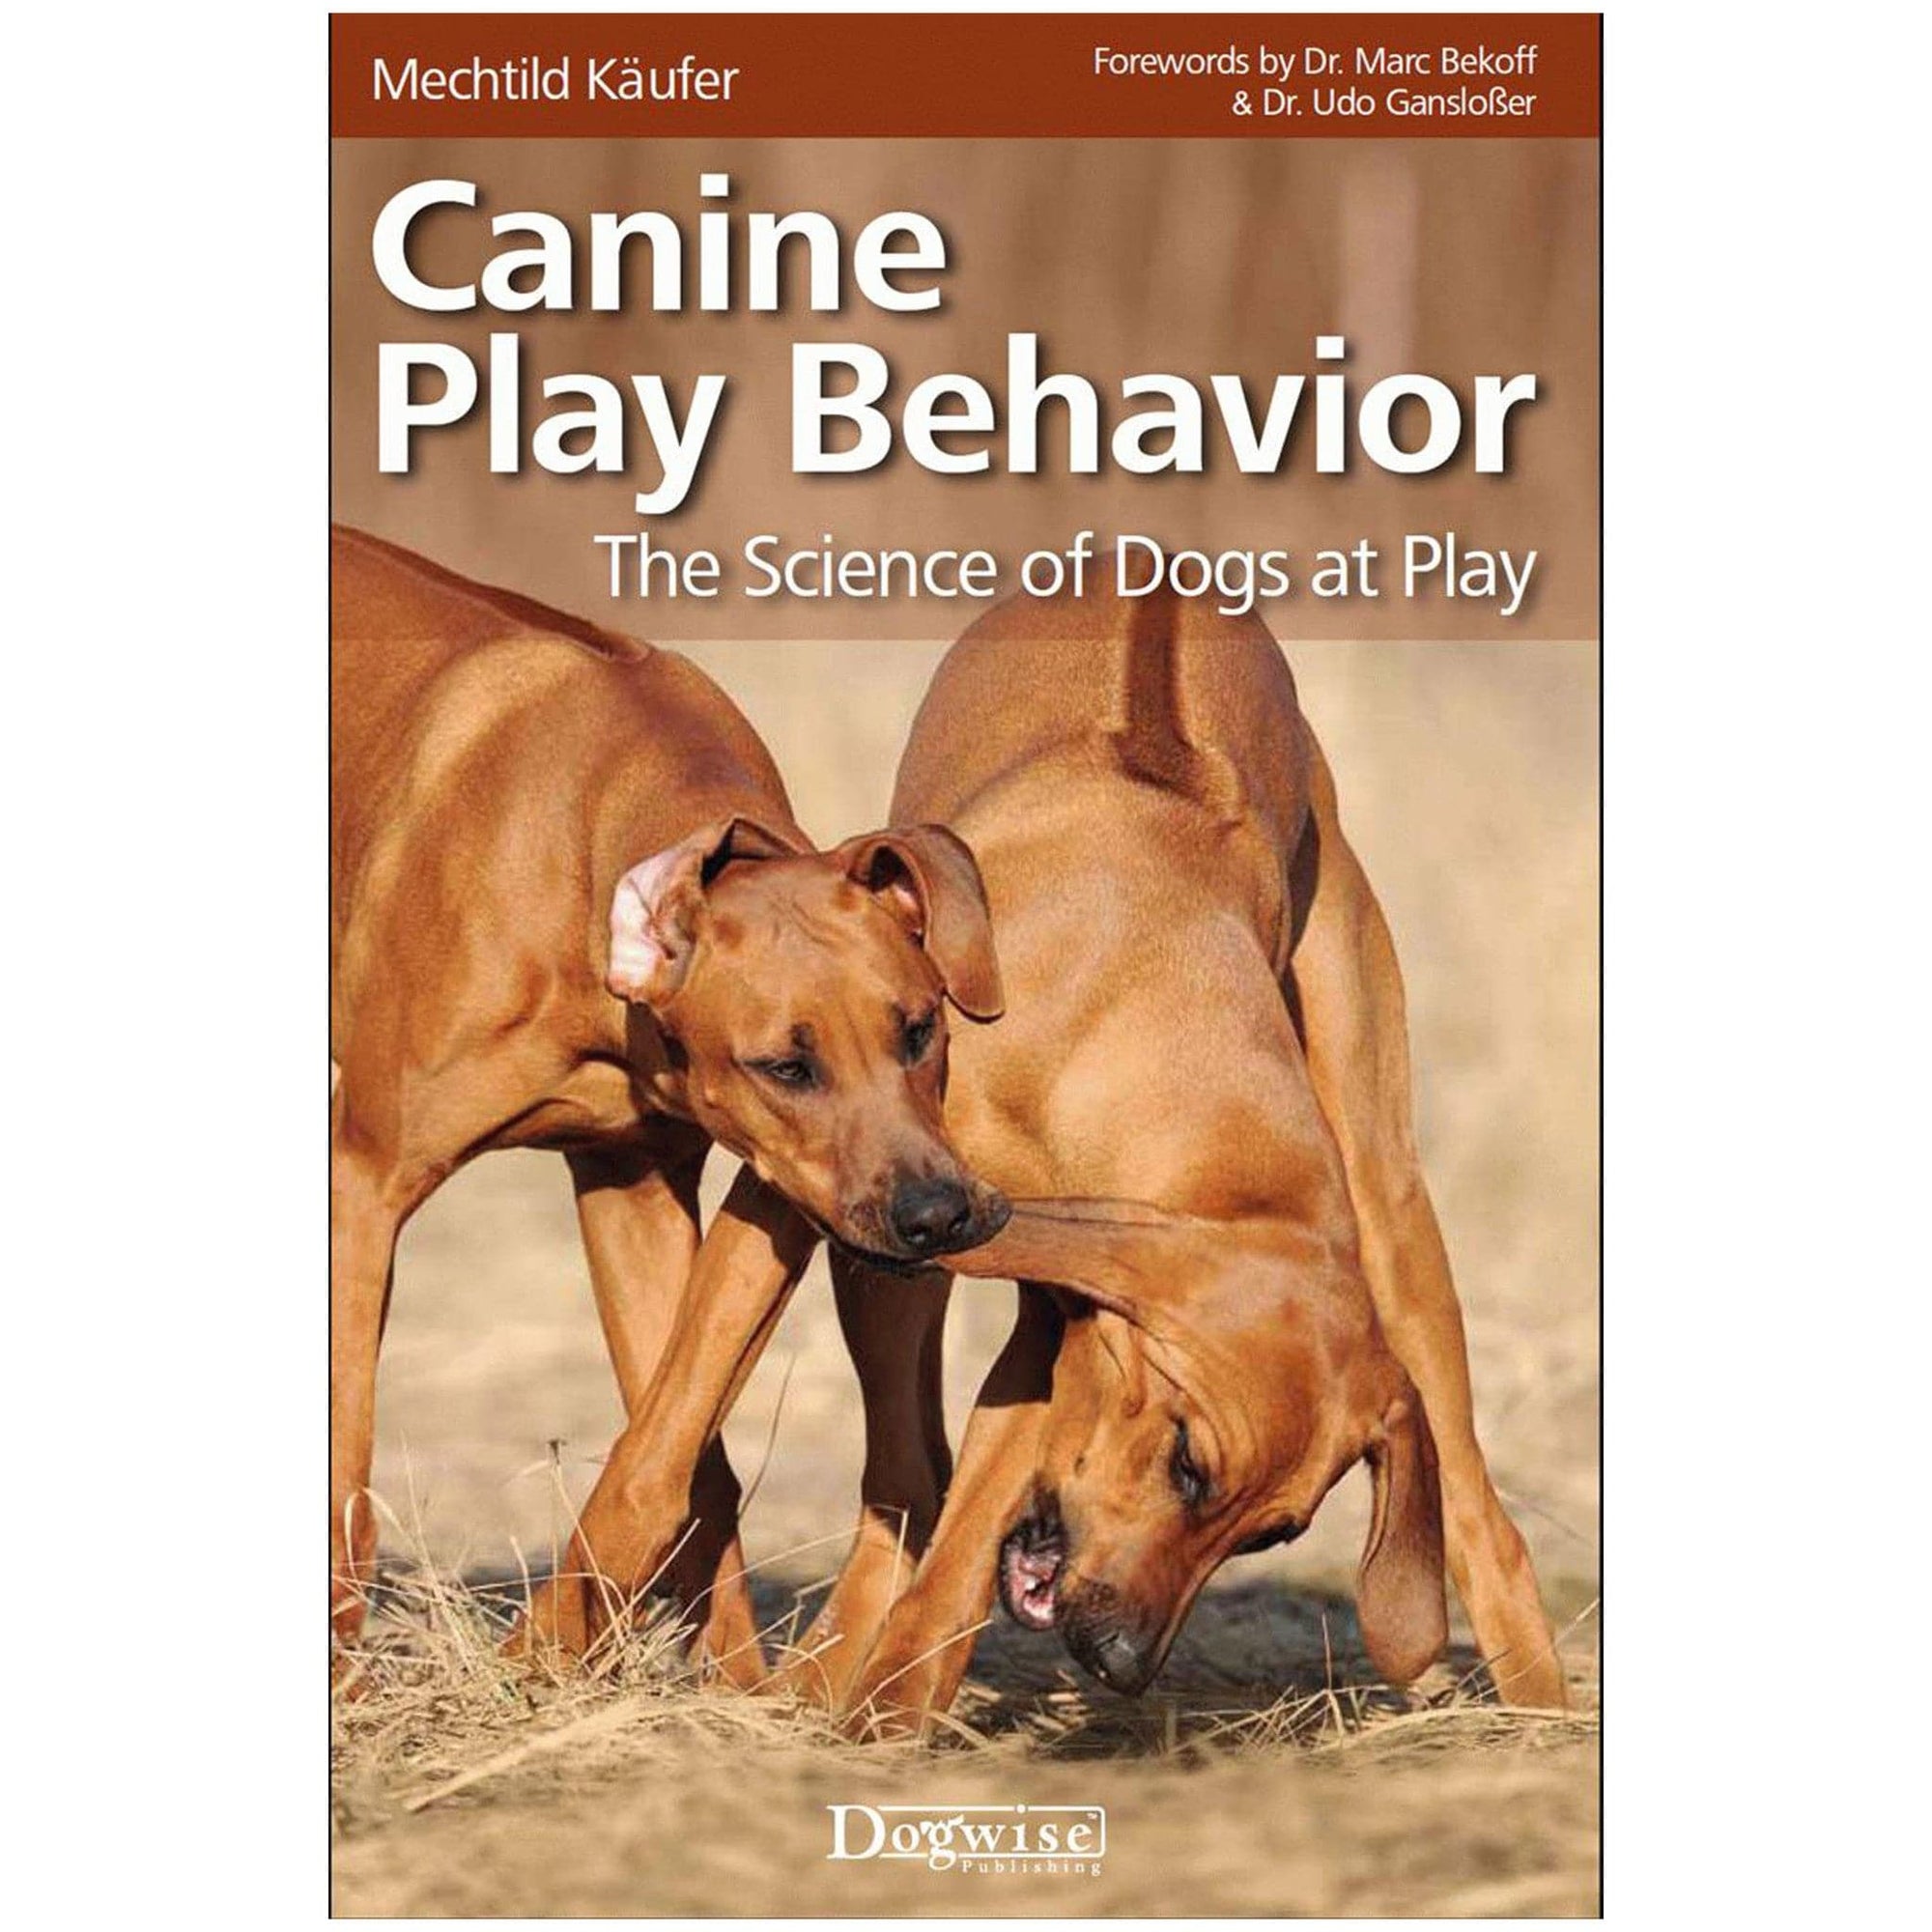 Canine Play Behavior: The Science of Dogs at Play by Mechtild Käufer  e-book